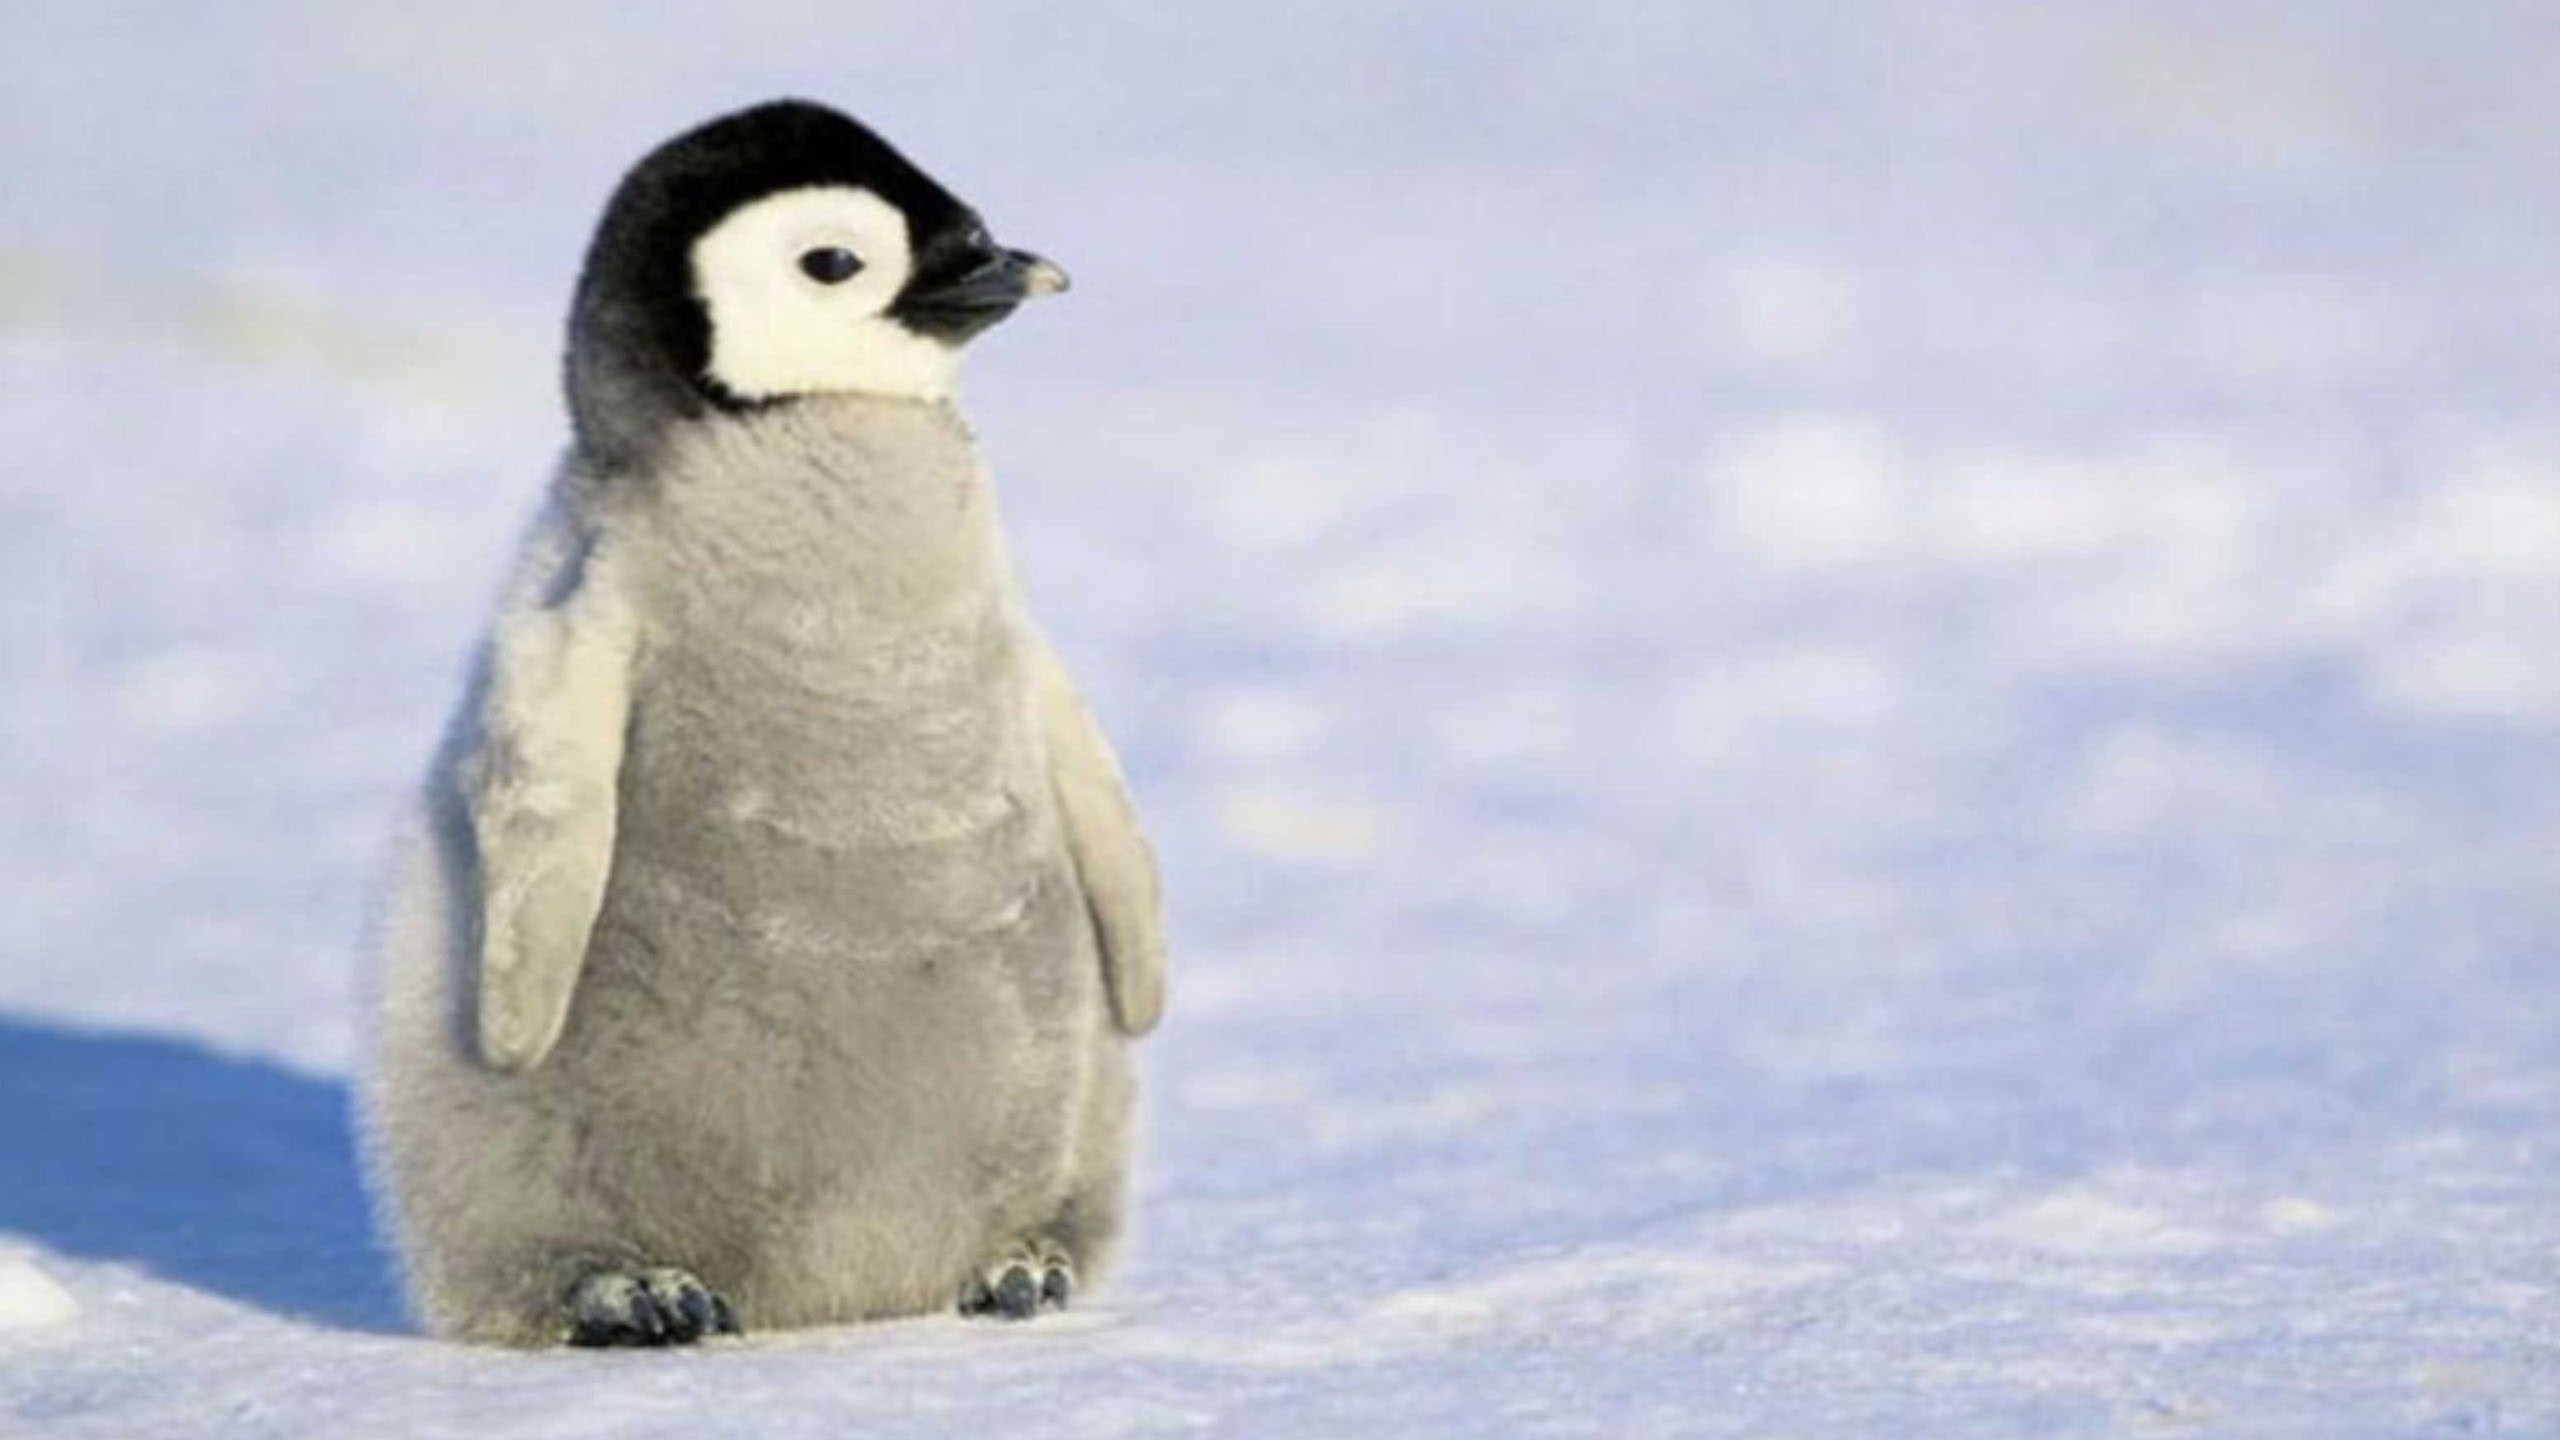 Charming Penguin Baby - High Quality Baby Penguin - HD Wallpaper 